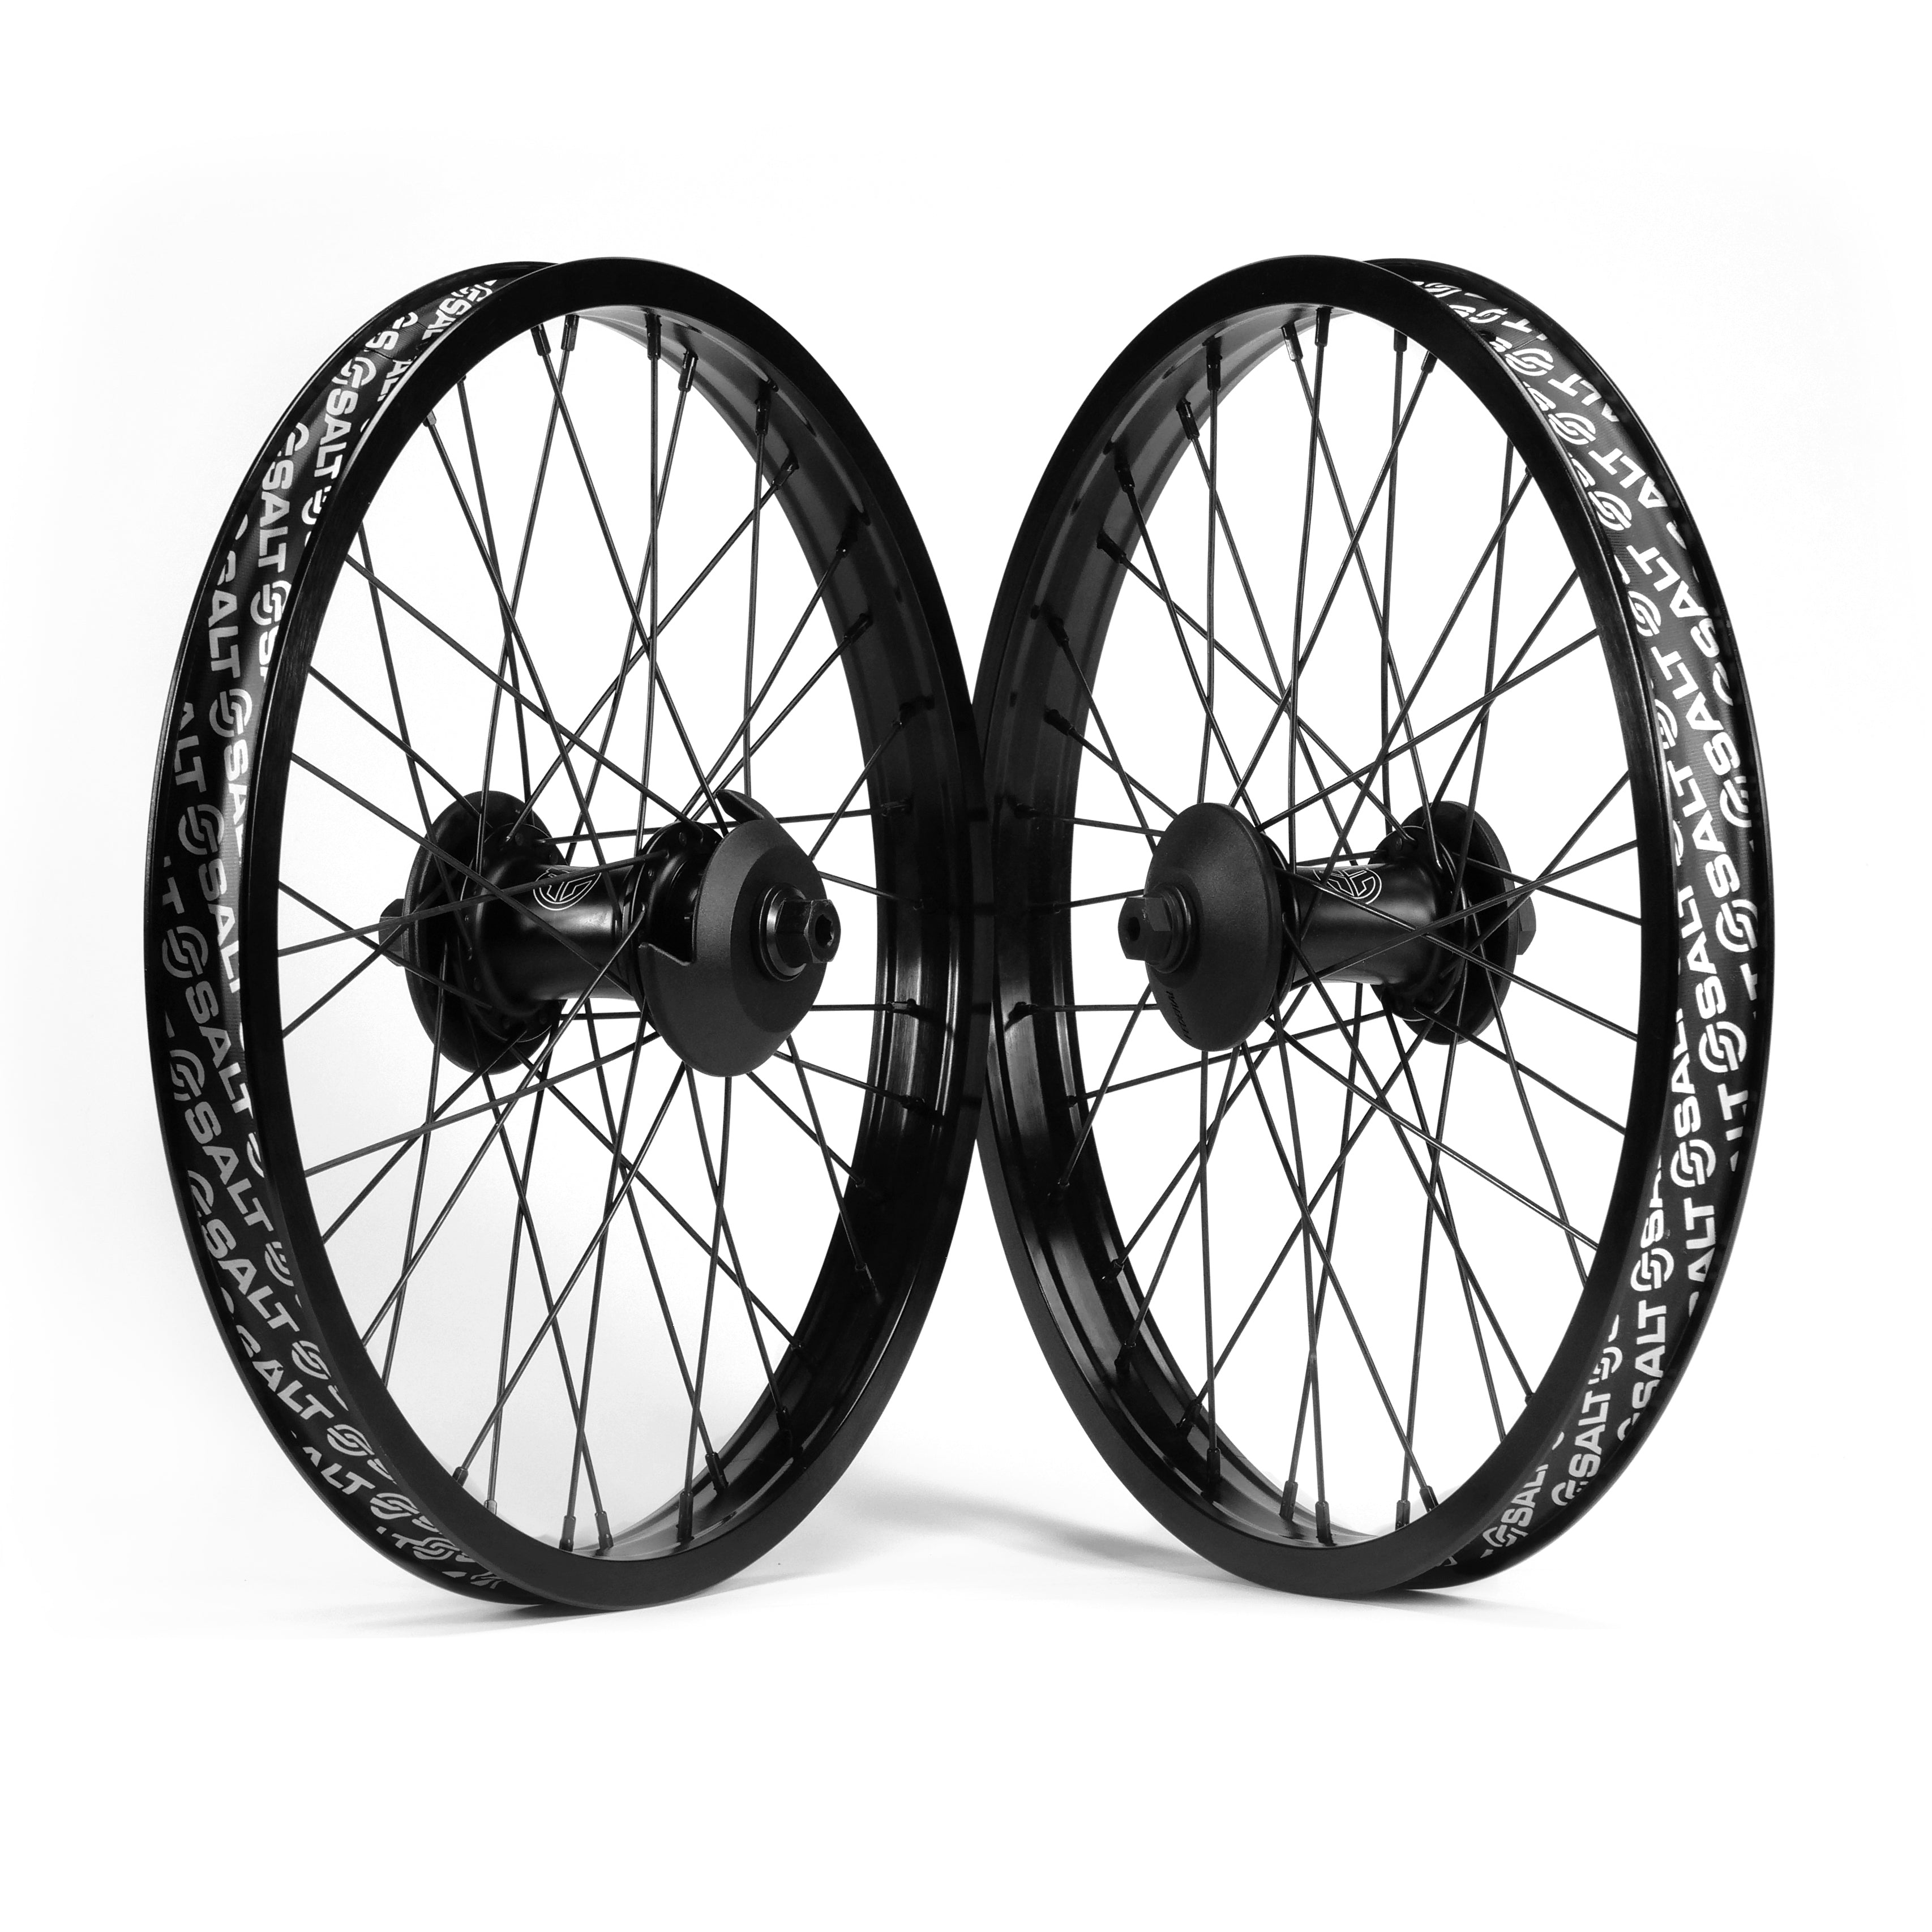 Two Federal Stance Pro x Alienation 18 Custom Wheelsets with detailed spokes and Federal hubset, positioned upright and parallel to each other on a white background.